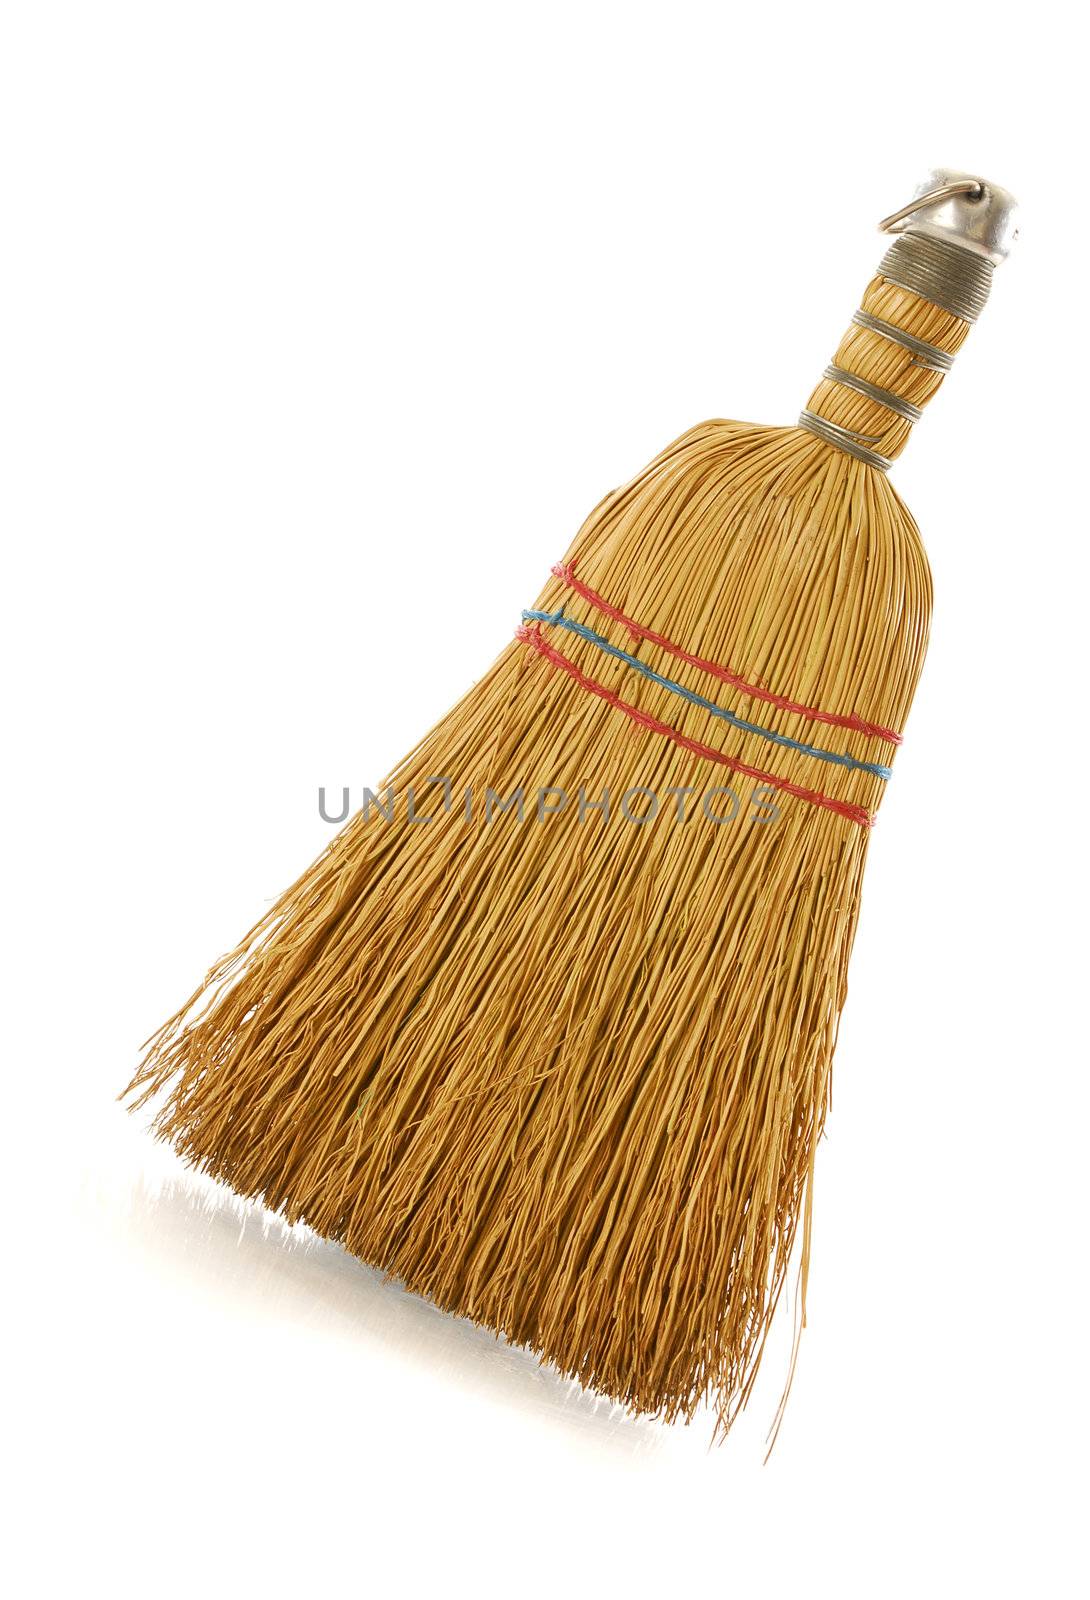 straw whisk broom by willeecole123